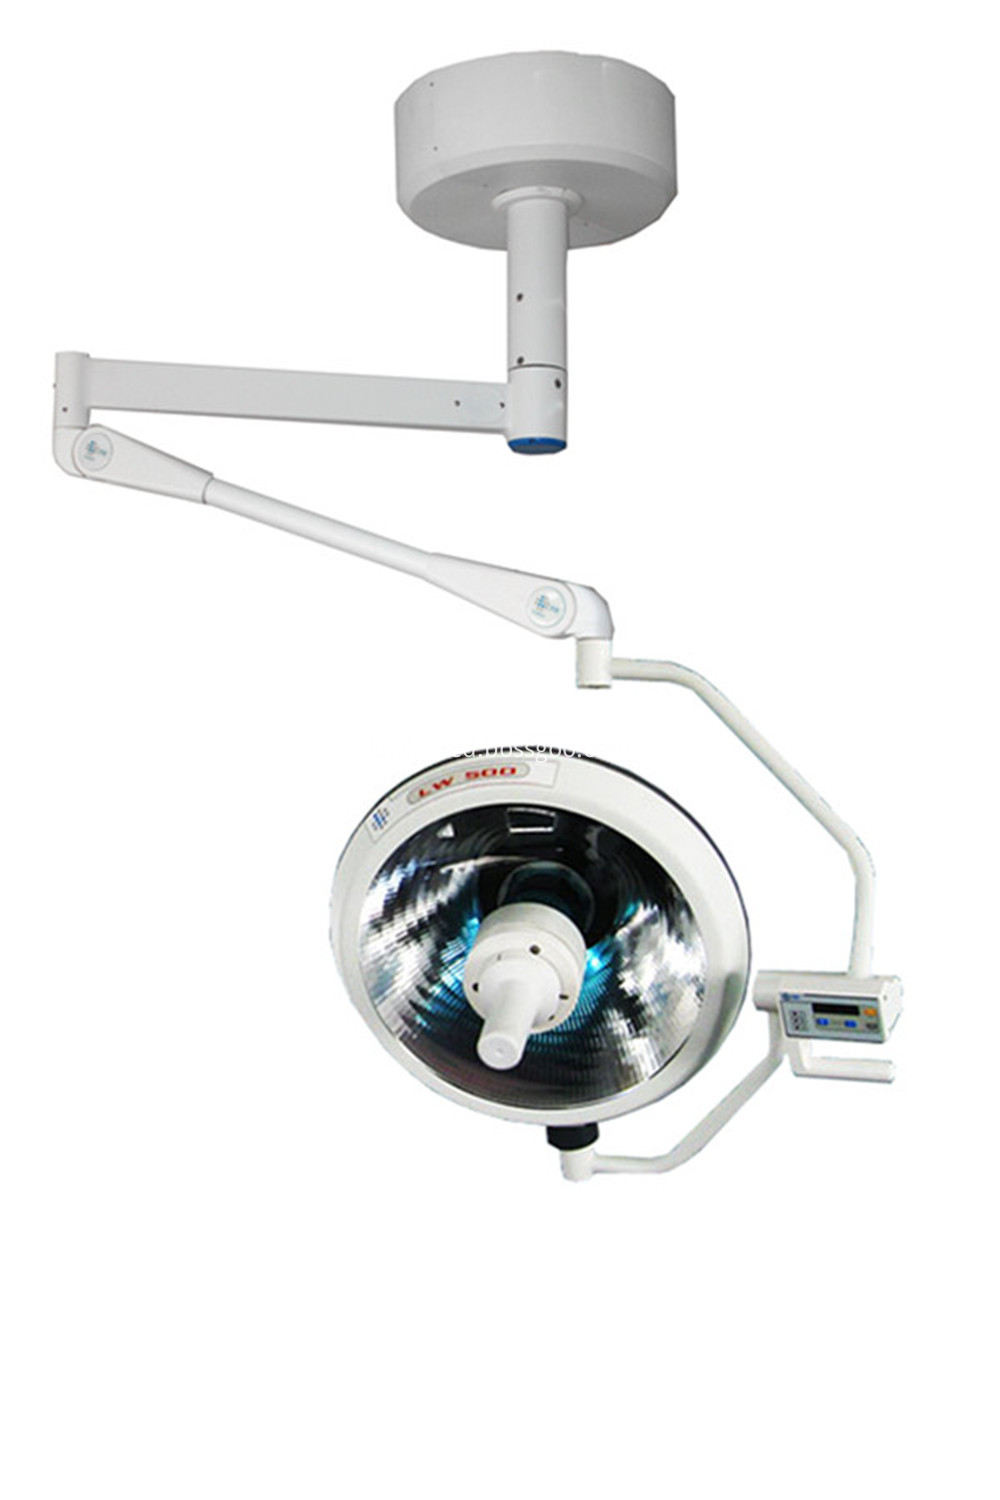 High quality ceiling halogen surgical light